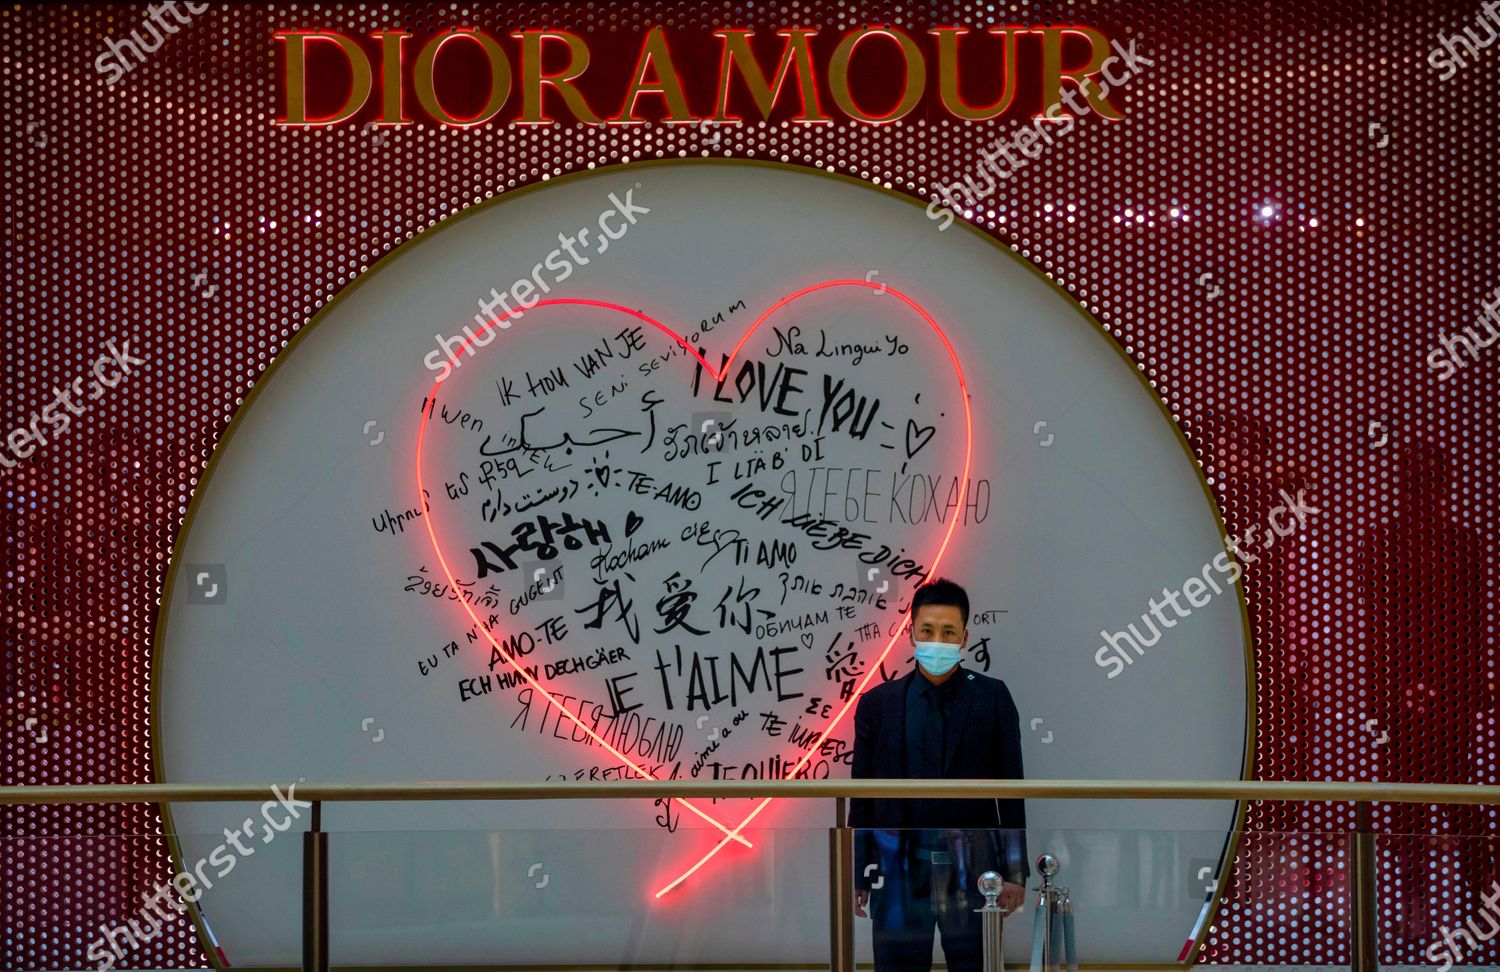 Man Looking in Dior Store editorial image. Image of pandemic